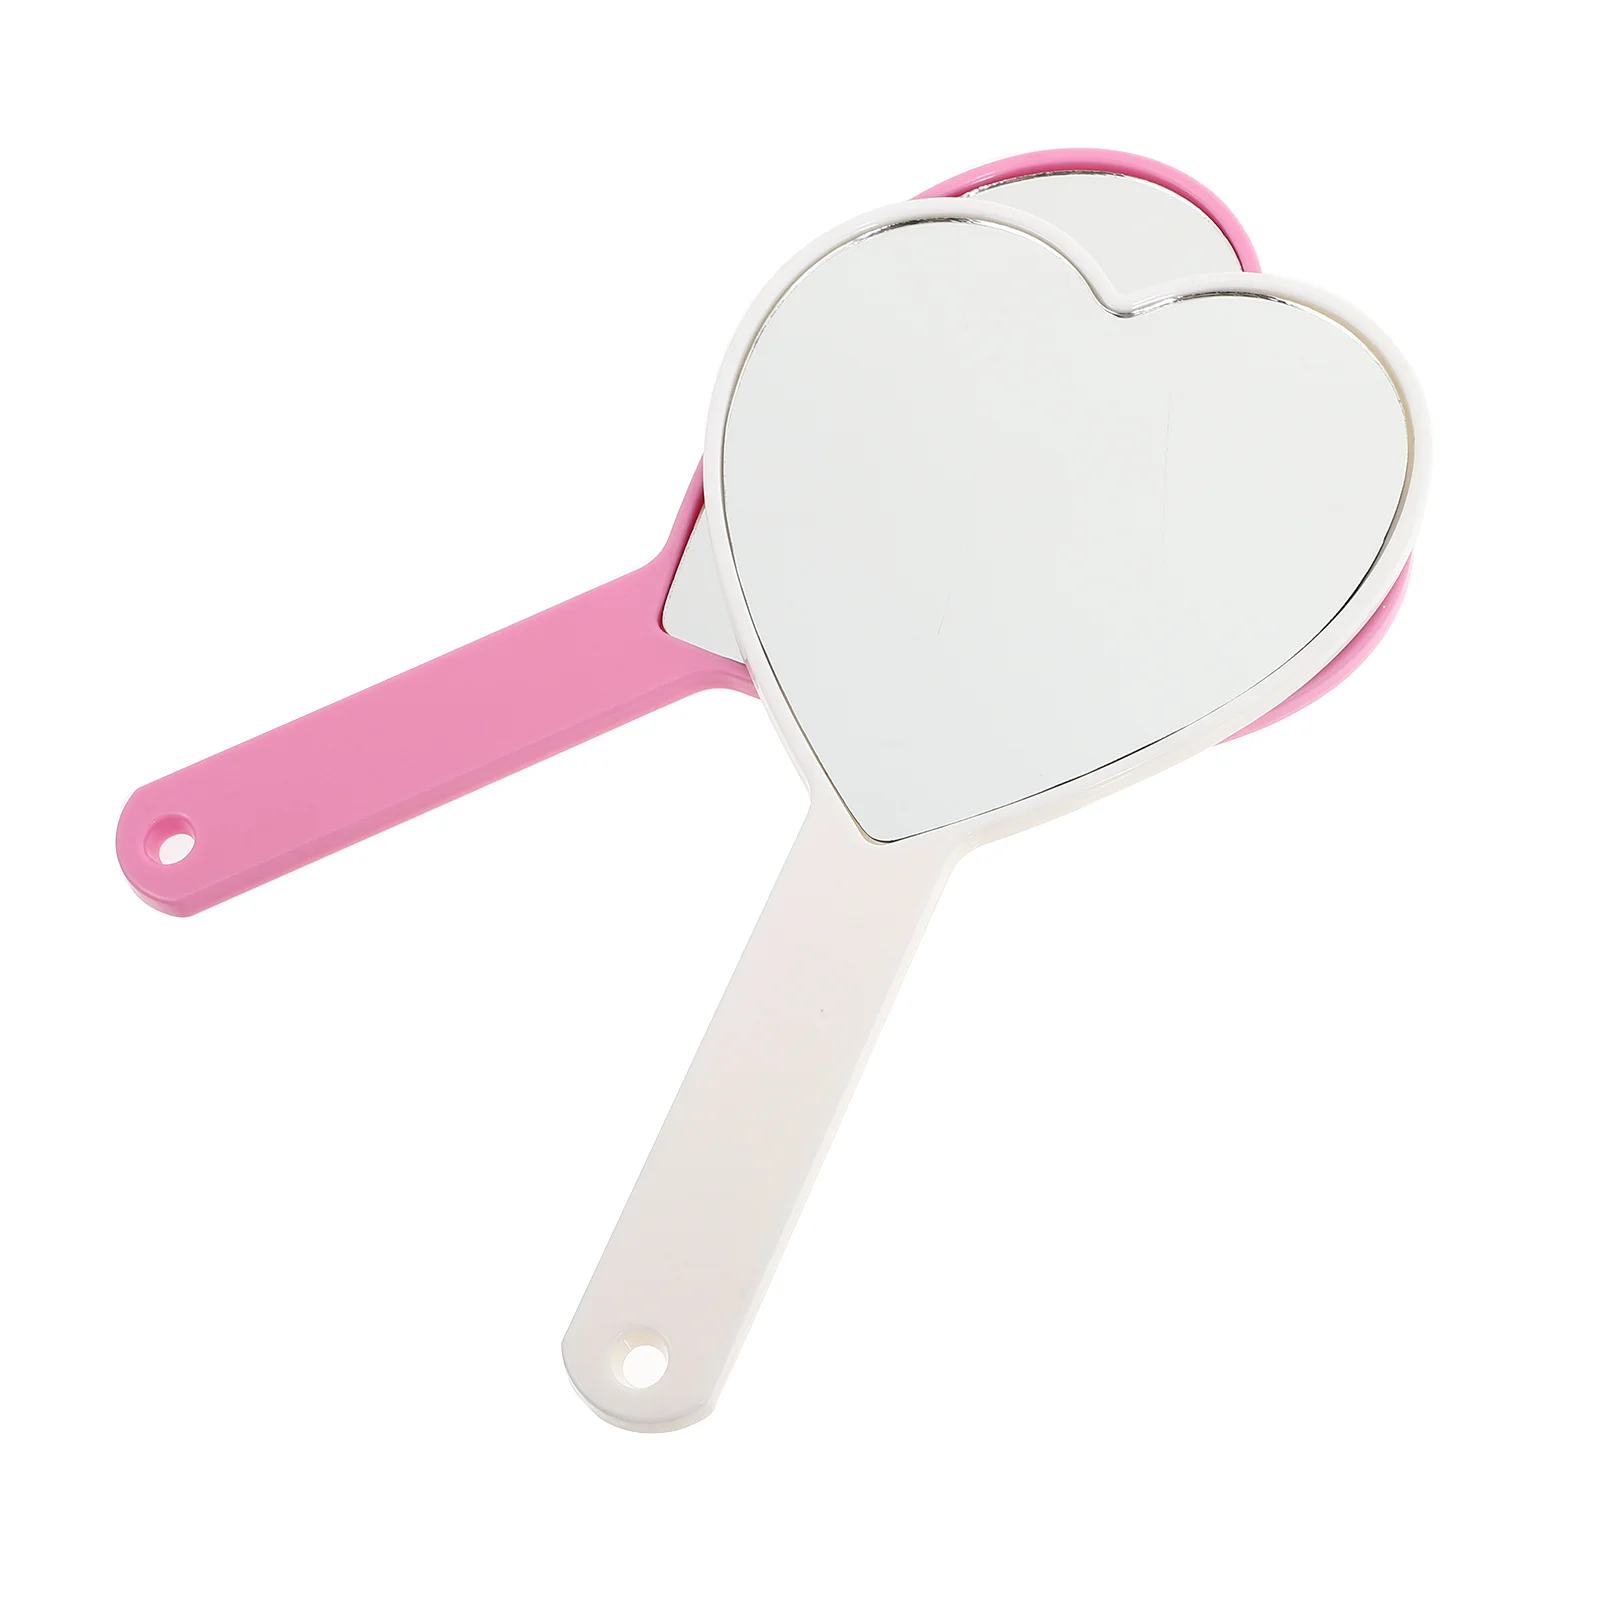 Heart-Shaped LED Makeup Mirror with Portable Compact Design and High-Definition Clear Surface - Ideal Gift for Girls and Women